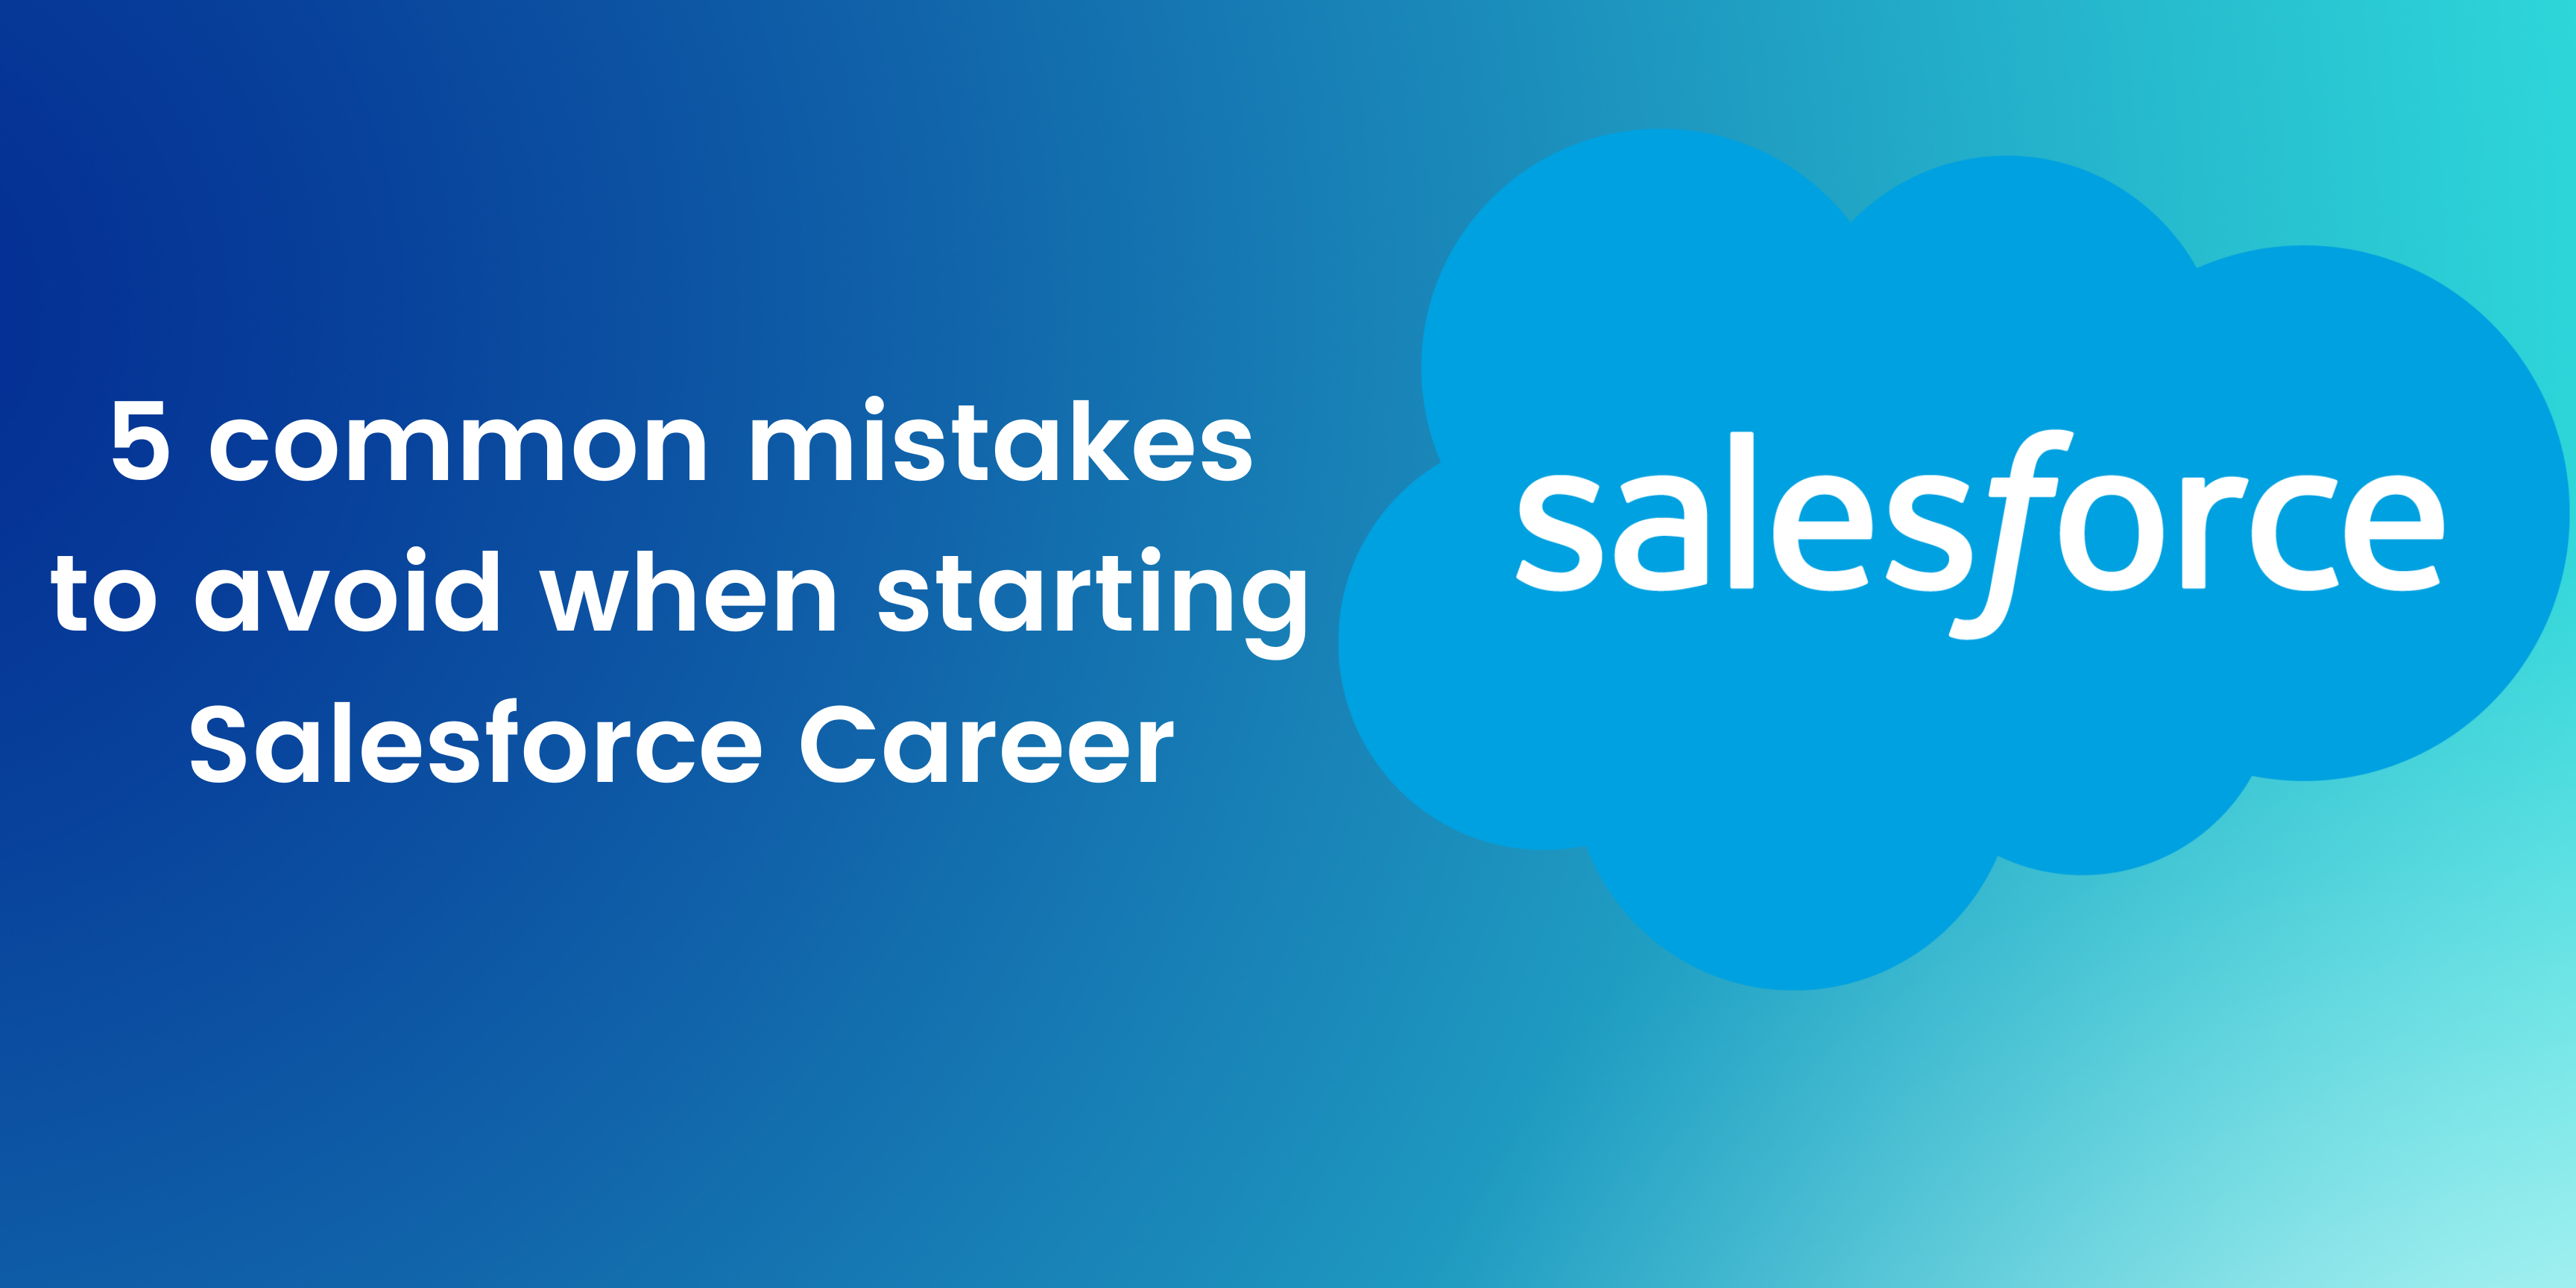 5 Common Mistakes To Avoid When Starting A Salesforce Career